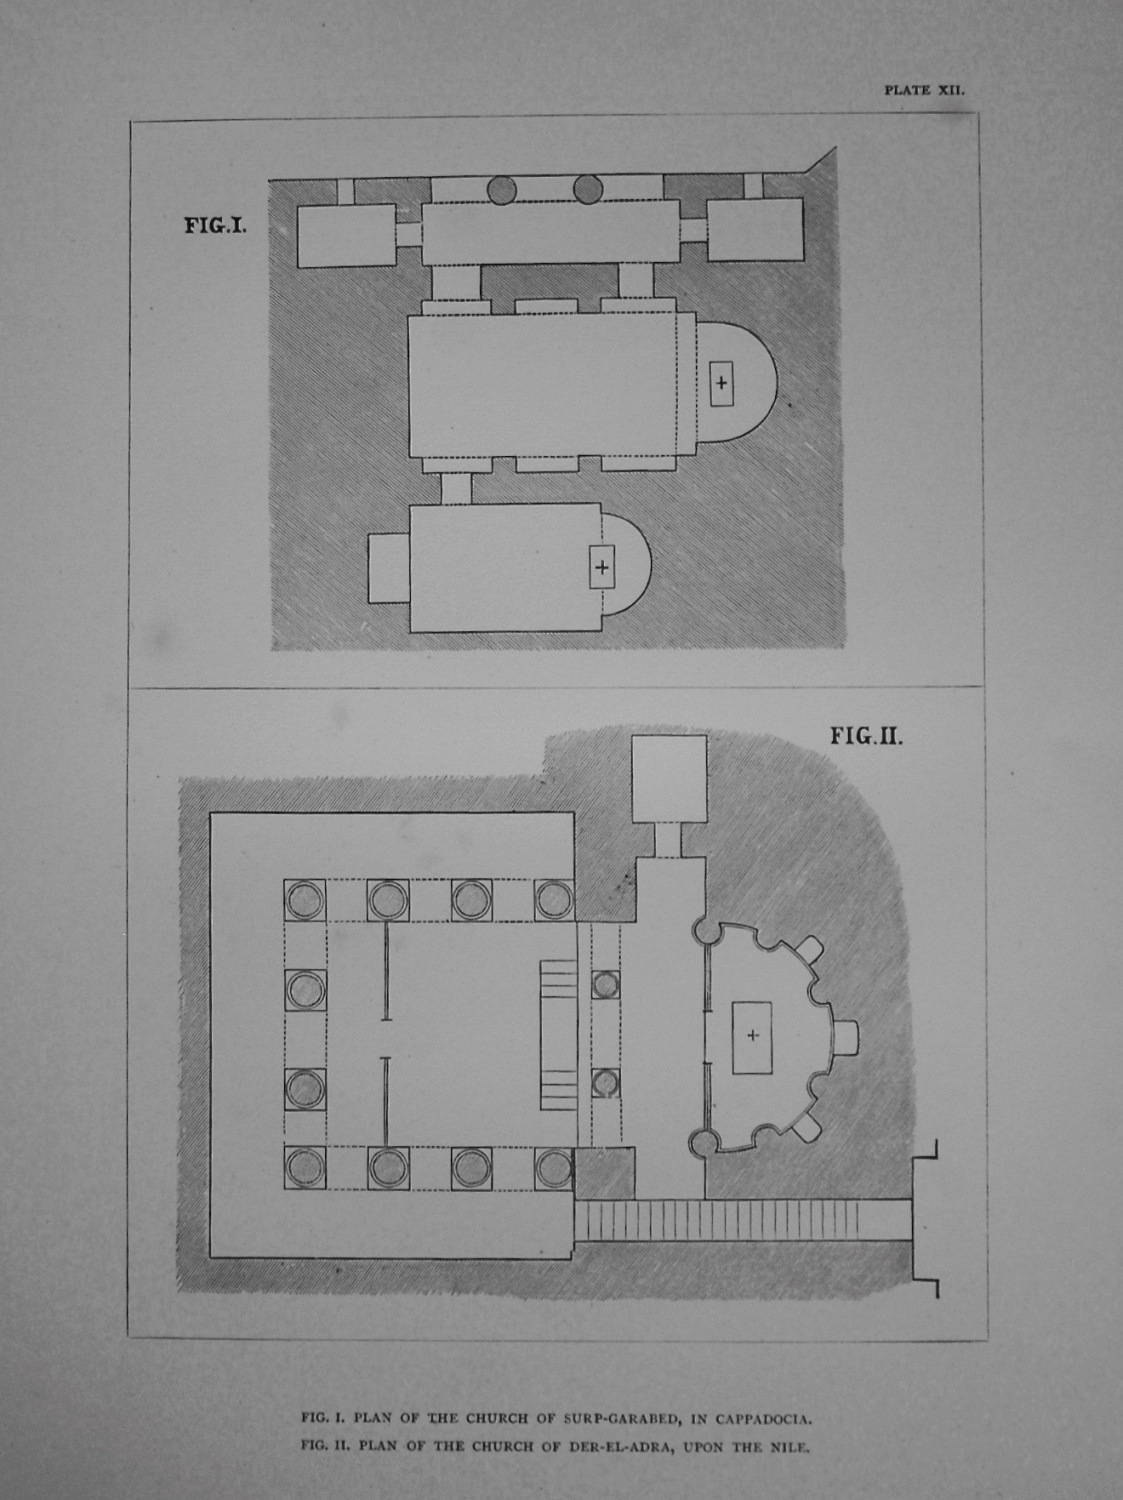 Plan of the Church of Surp-Garabed, in Cappadocia. Plan of the Church of De